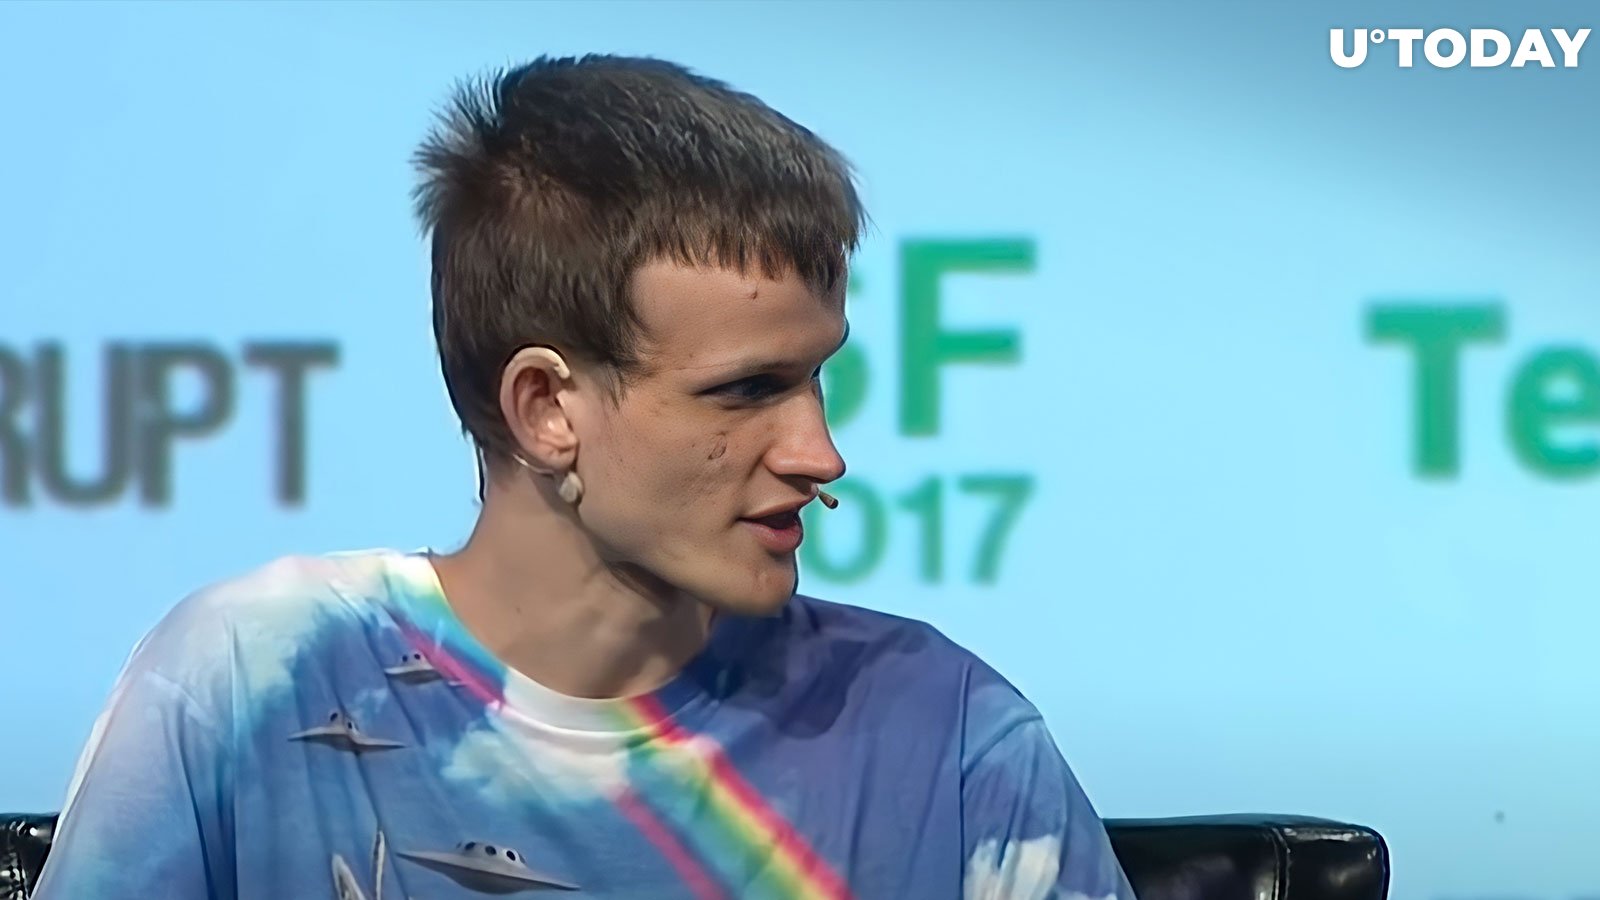 Ethereum’s Vitalik Buterin Says He’s Glad ETFs Are Being Delayed 